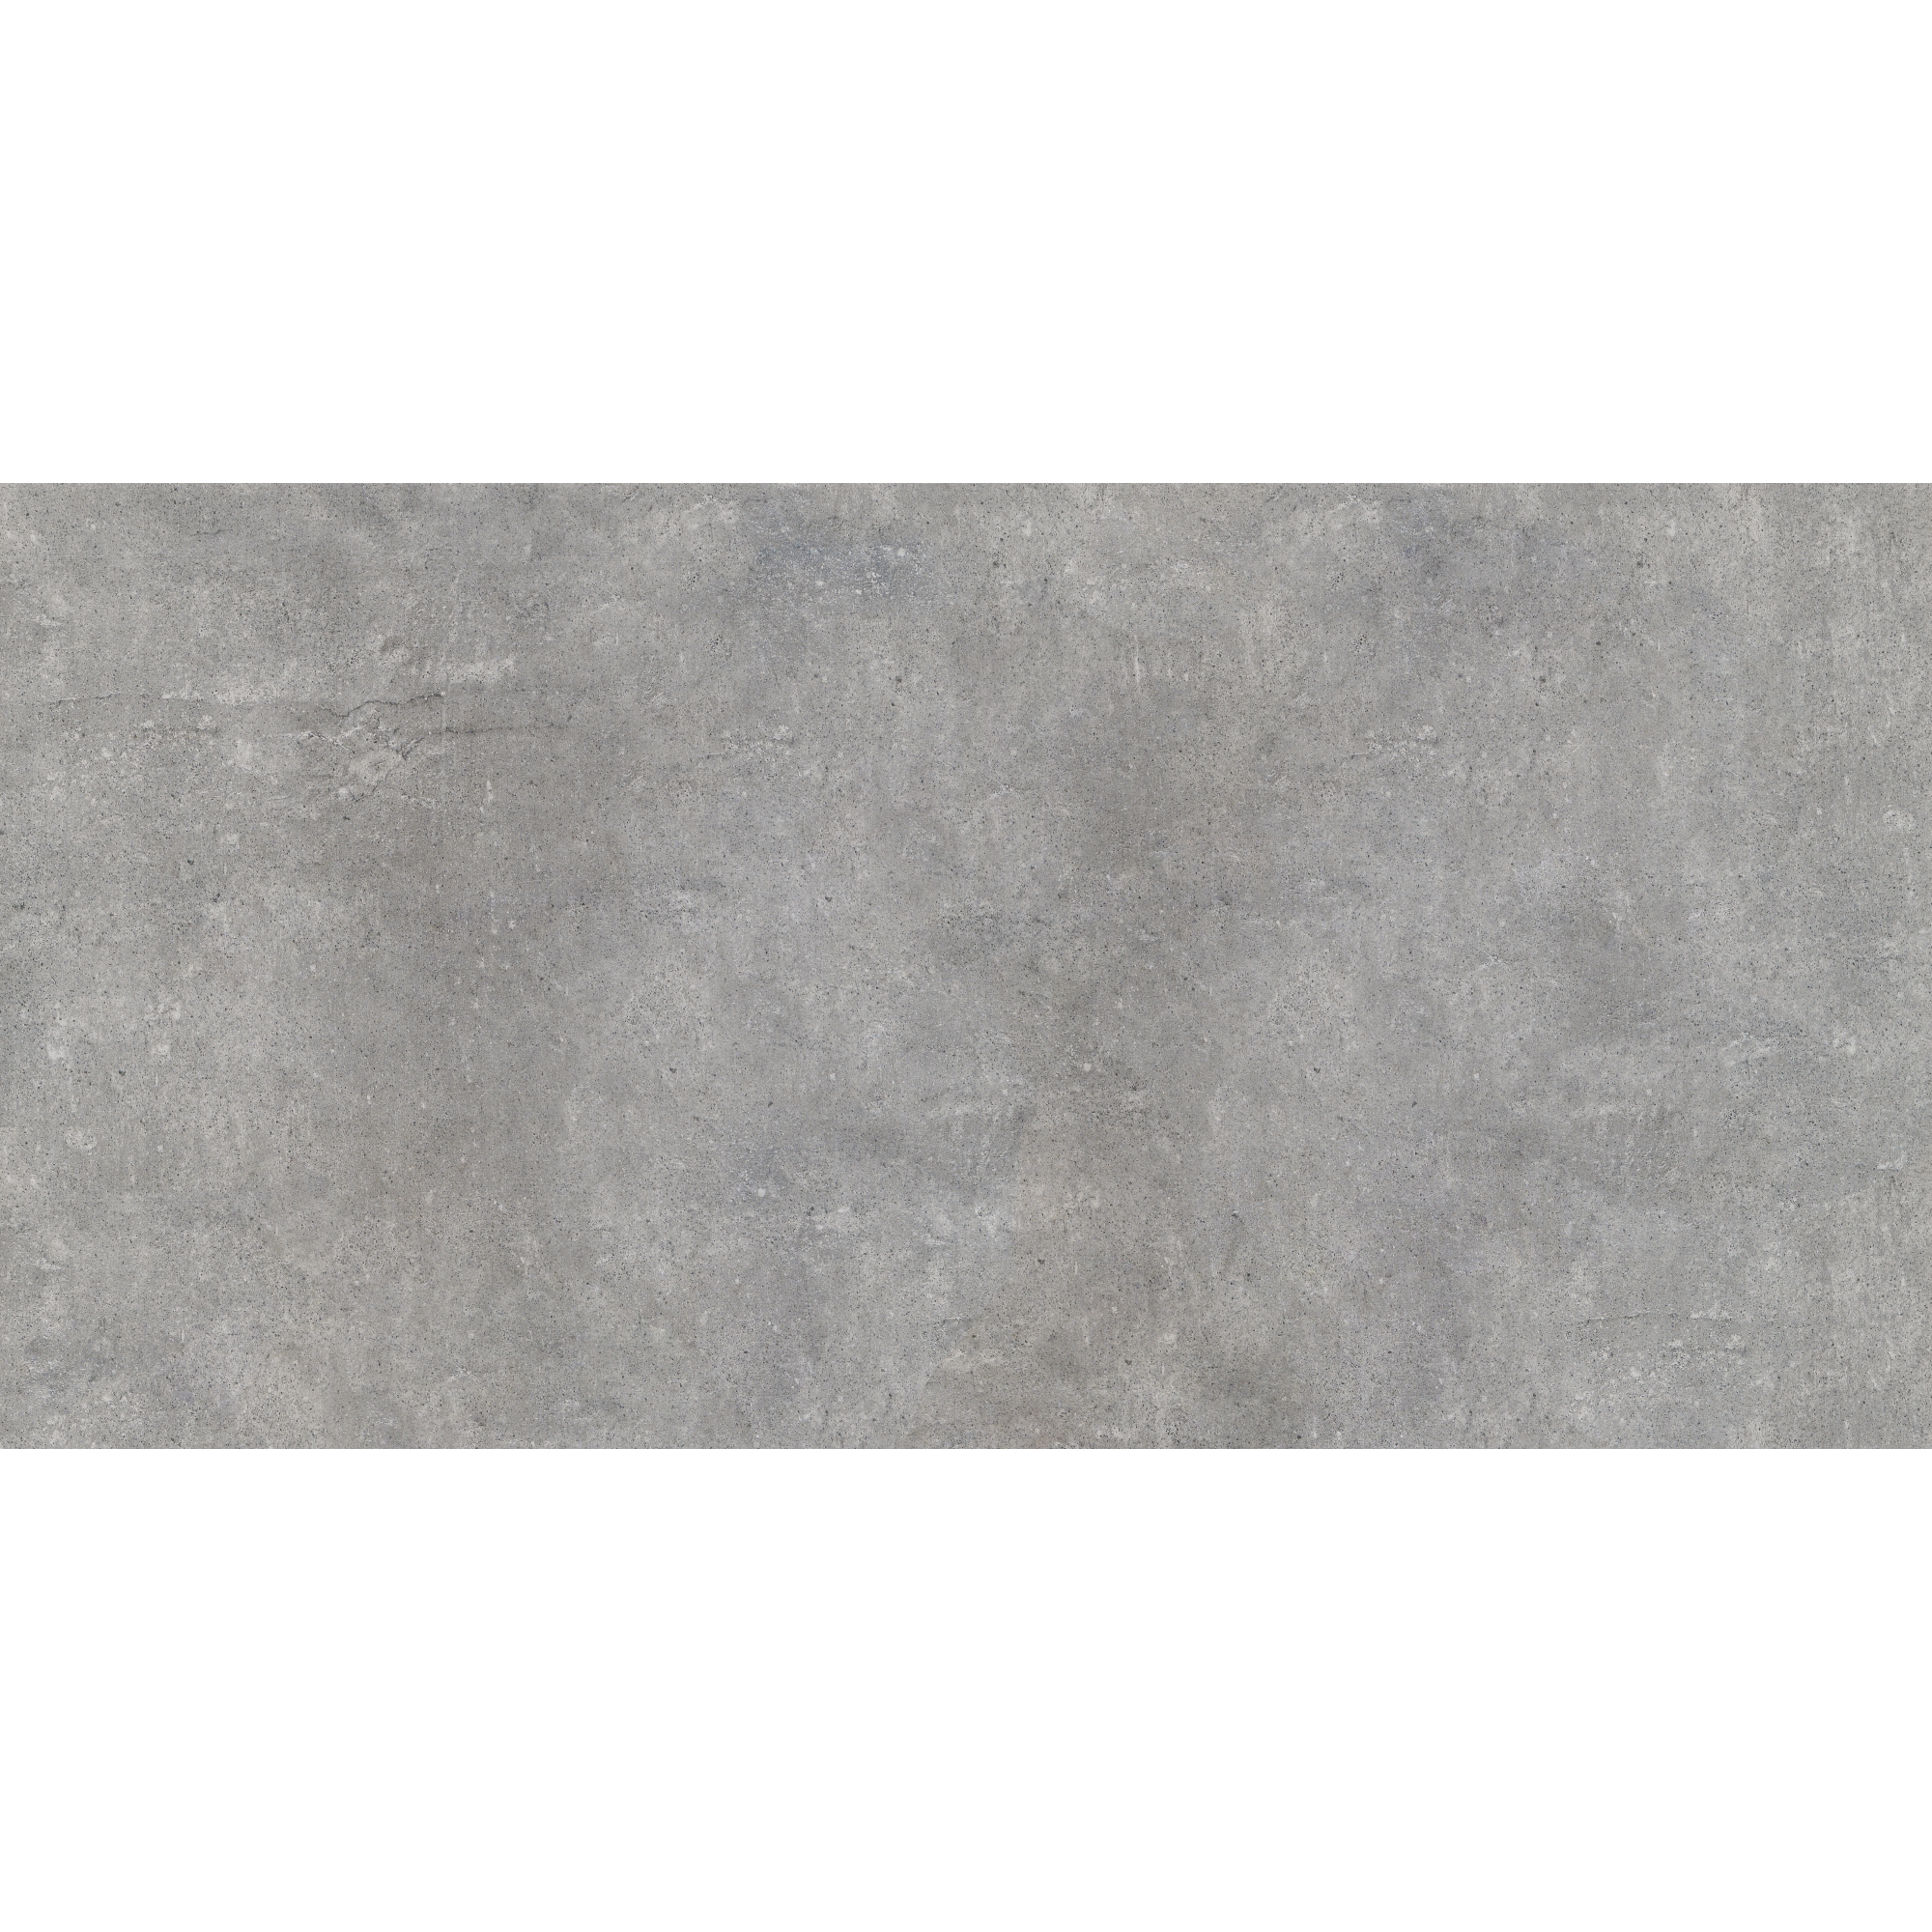 Bodenfliese Beton grigio 45,7x91,5cm + product picture